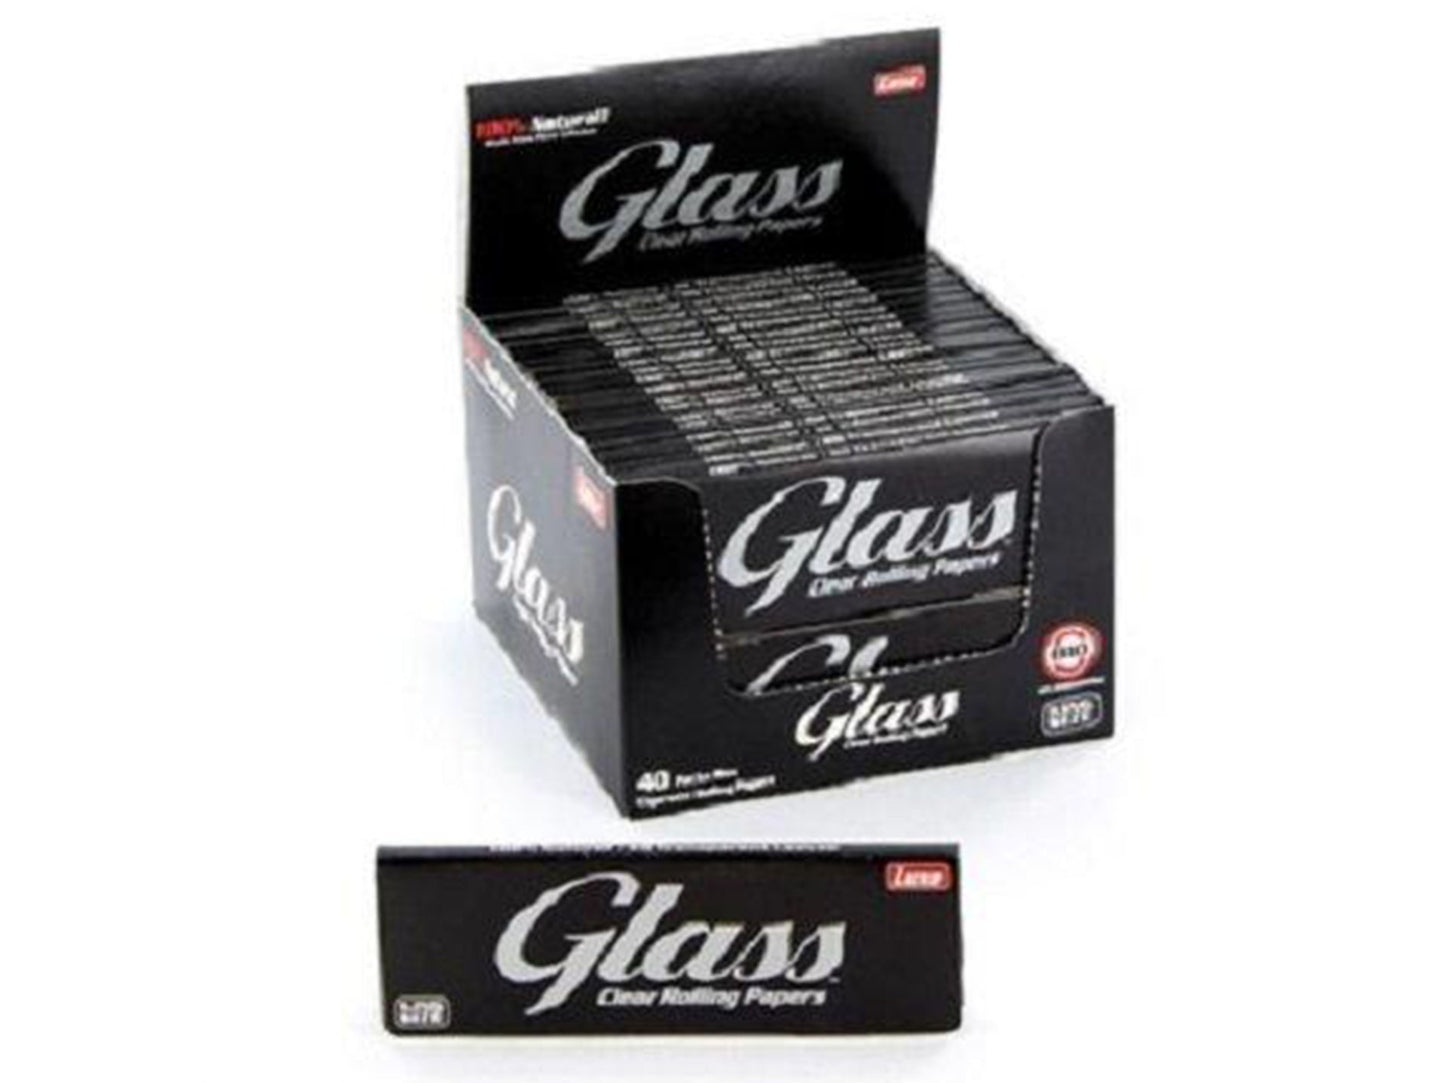 GLASS King Size Clear Cellulose Cigarette Rolling Papers - 24 Pack - VIR Wholesale